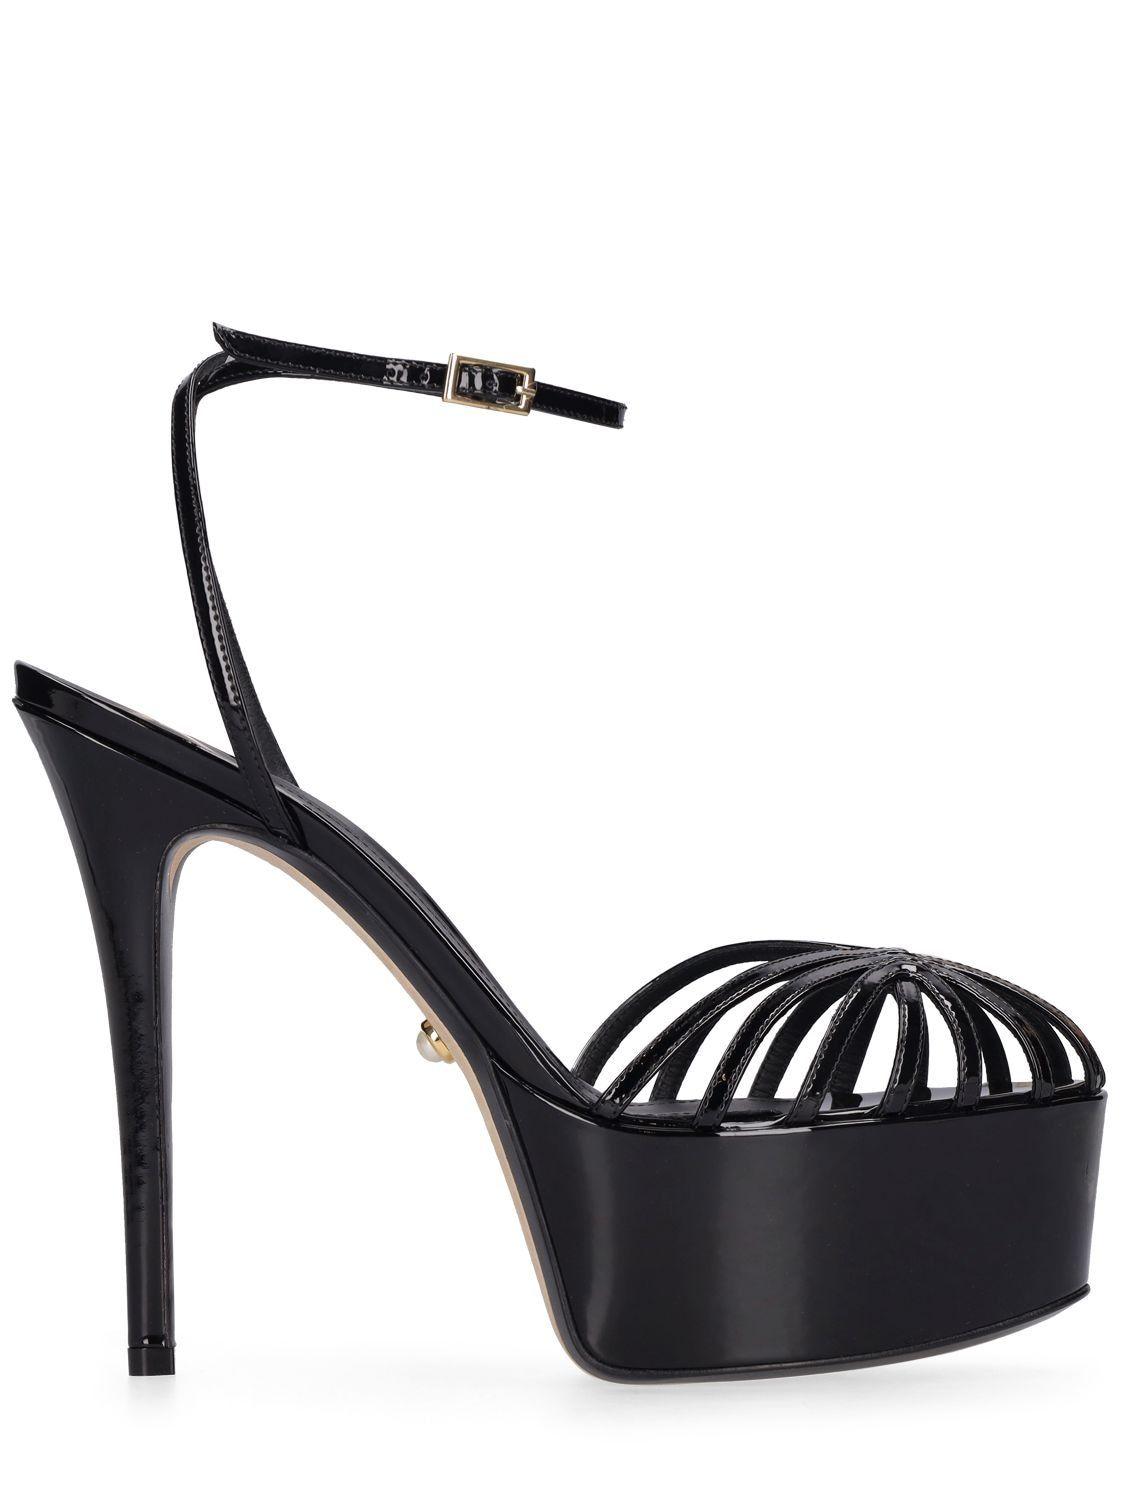 ALEVI 95mm Clio Patent Leather Sandals in Black | Lyst